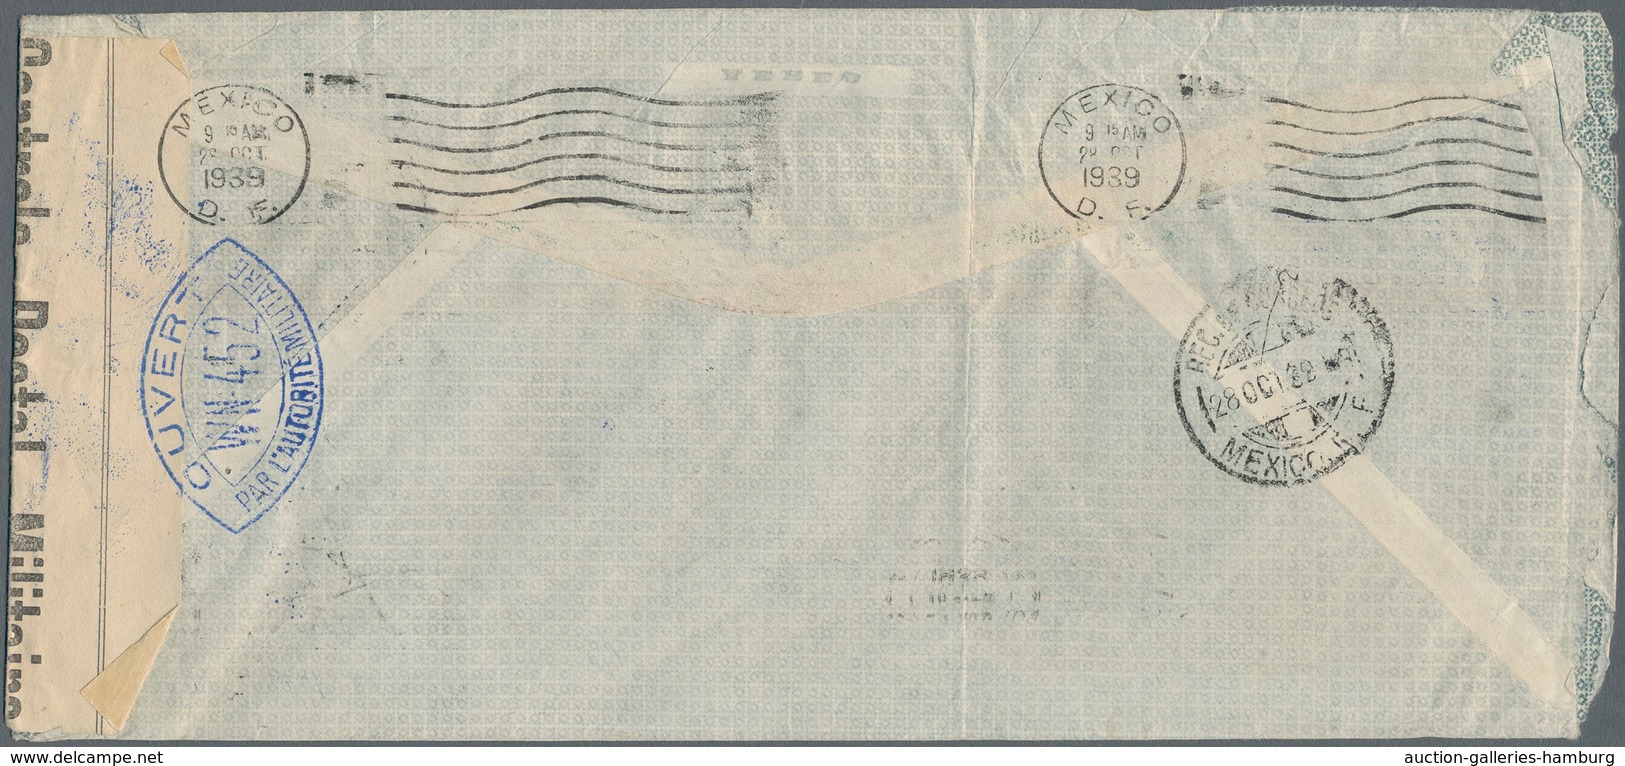 Mexiko: 1939, Airmail Cover From "MEXICO 24.AUG 39" To Nuremberg/Germany. The Airmail Route To Germa - México